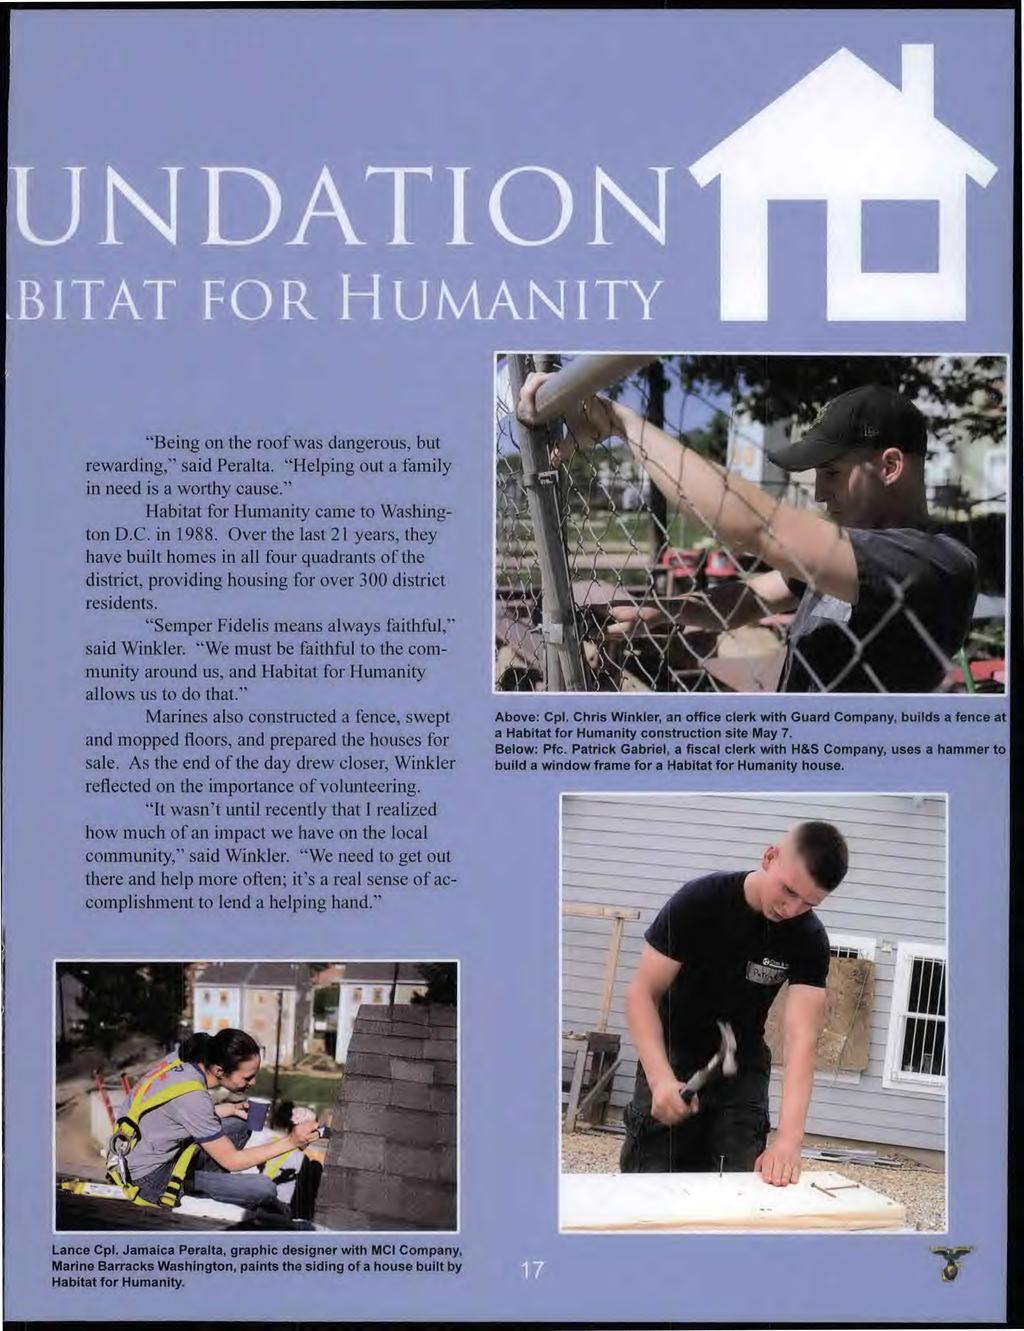 117i IAIIN lir 41114 "Being on the roof was dangerous but rewarding" said Peralta. "Helping out a family in need is a worthy cause." Habitat for Humanity came to Washington D.C. in 1988.